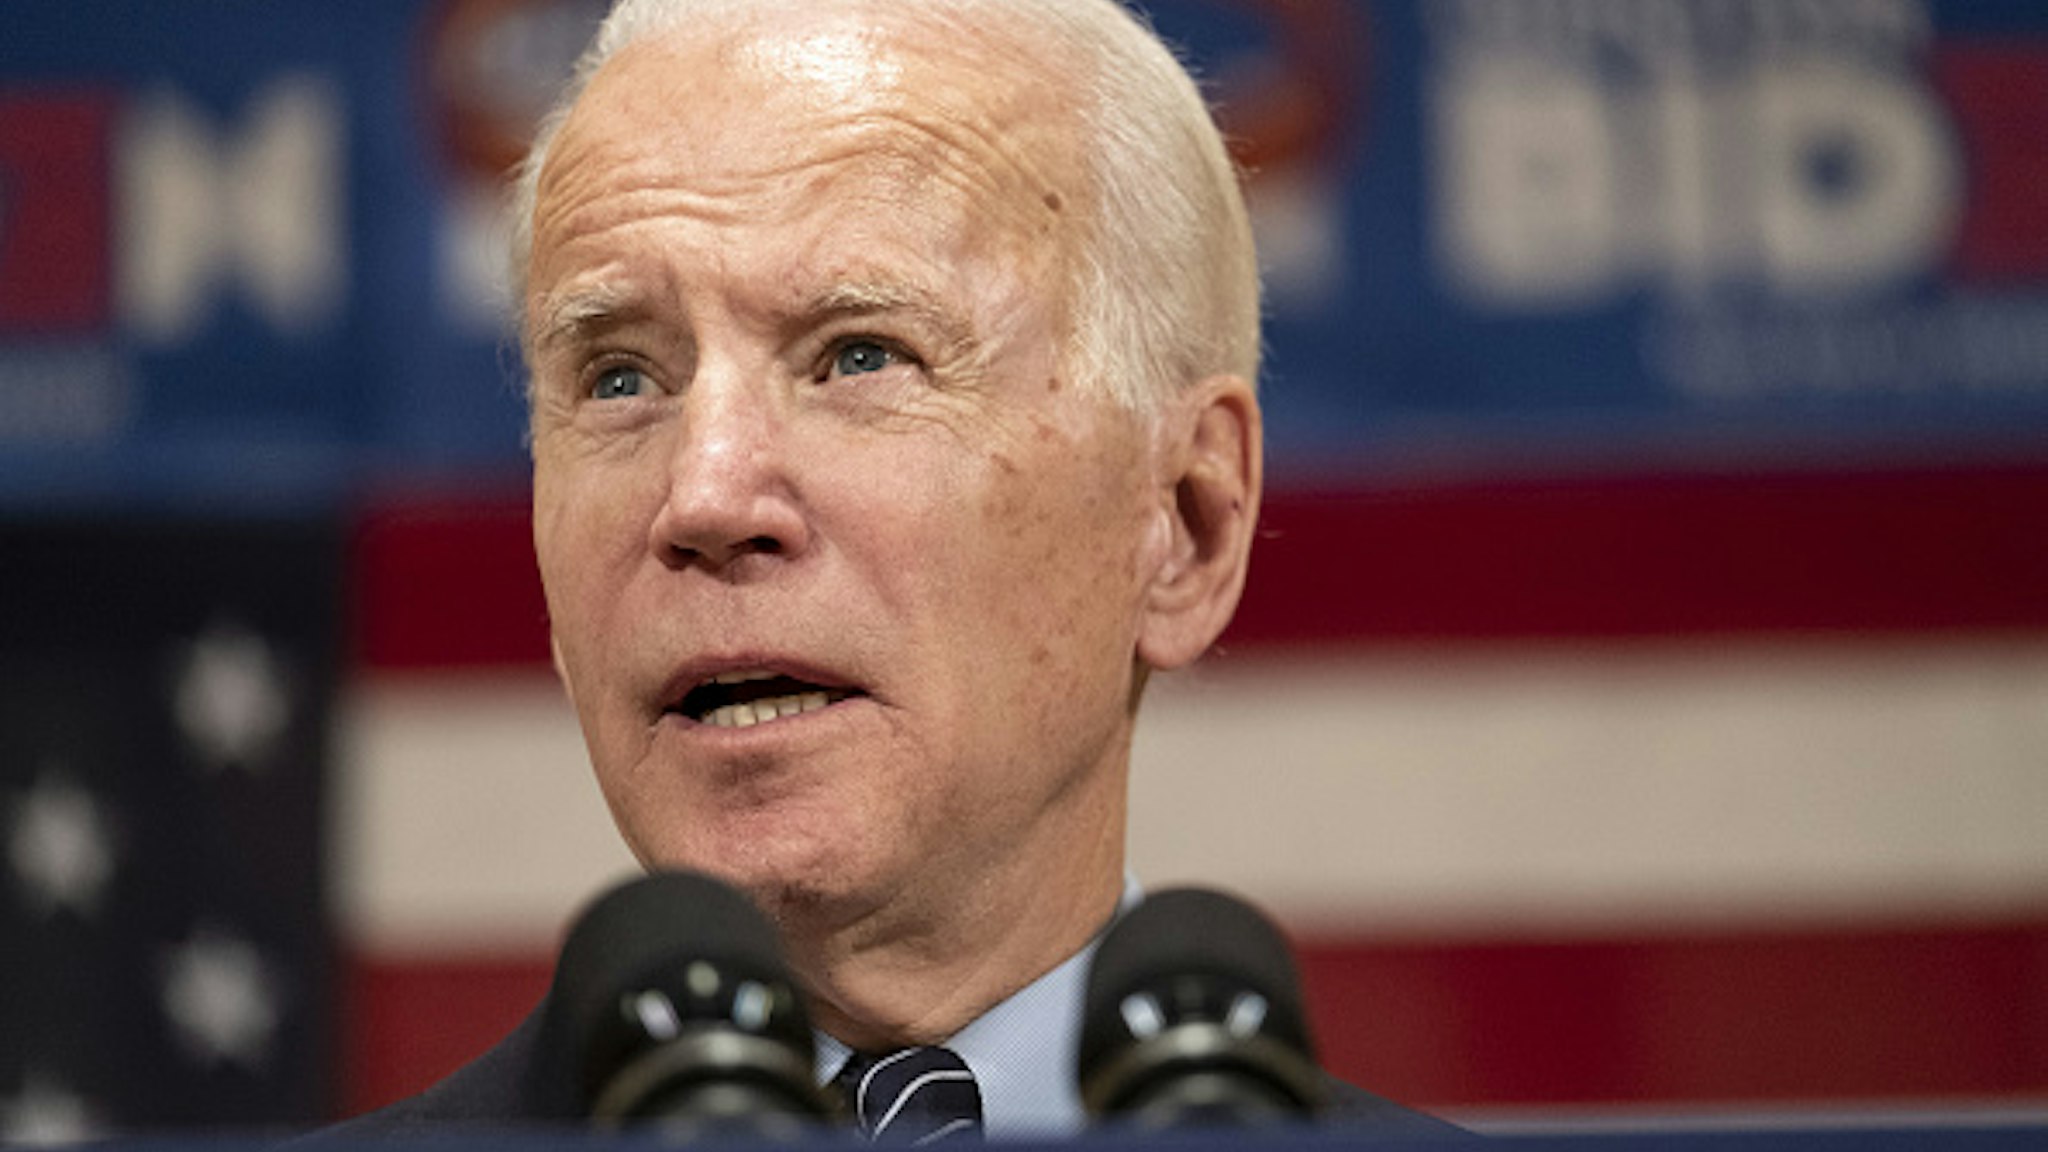 Former Vice President Joe Biden, 2020 Democratic presidential candidate, speaks during a campaign event in Columbus, Ohio, U.S., on Tuesday, March 10, 2020. Bernie Sanders and Biden have canceled planned rallies in Cleveland, Ohio Tuesday amid concerns about coronavirus spreading at public events and suggested the campaigns might suspend large gatherings.